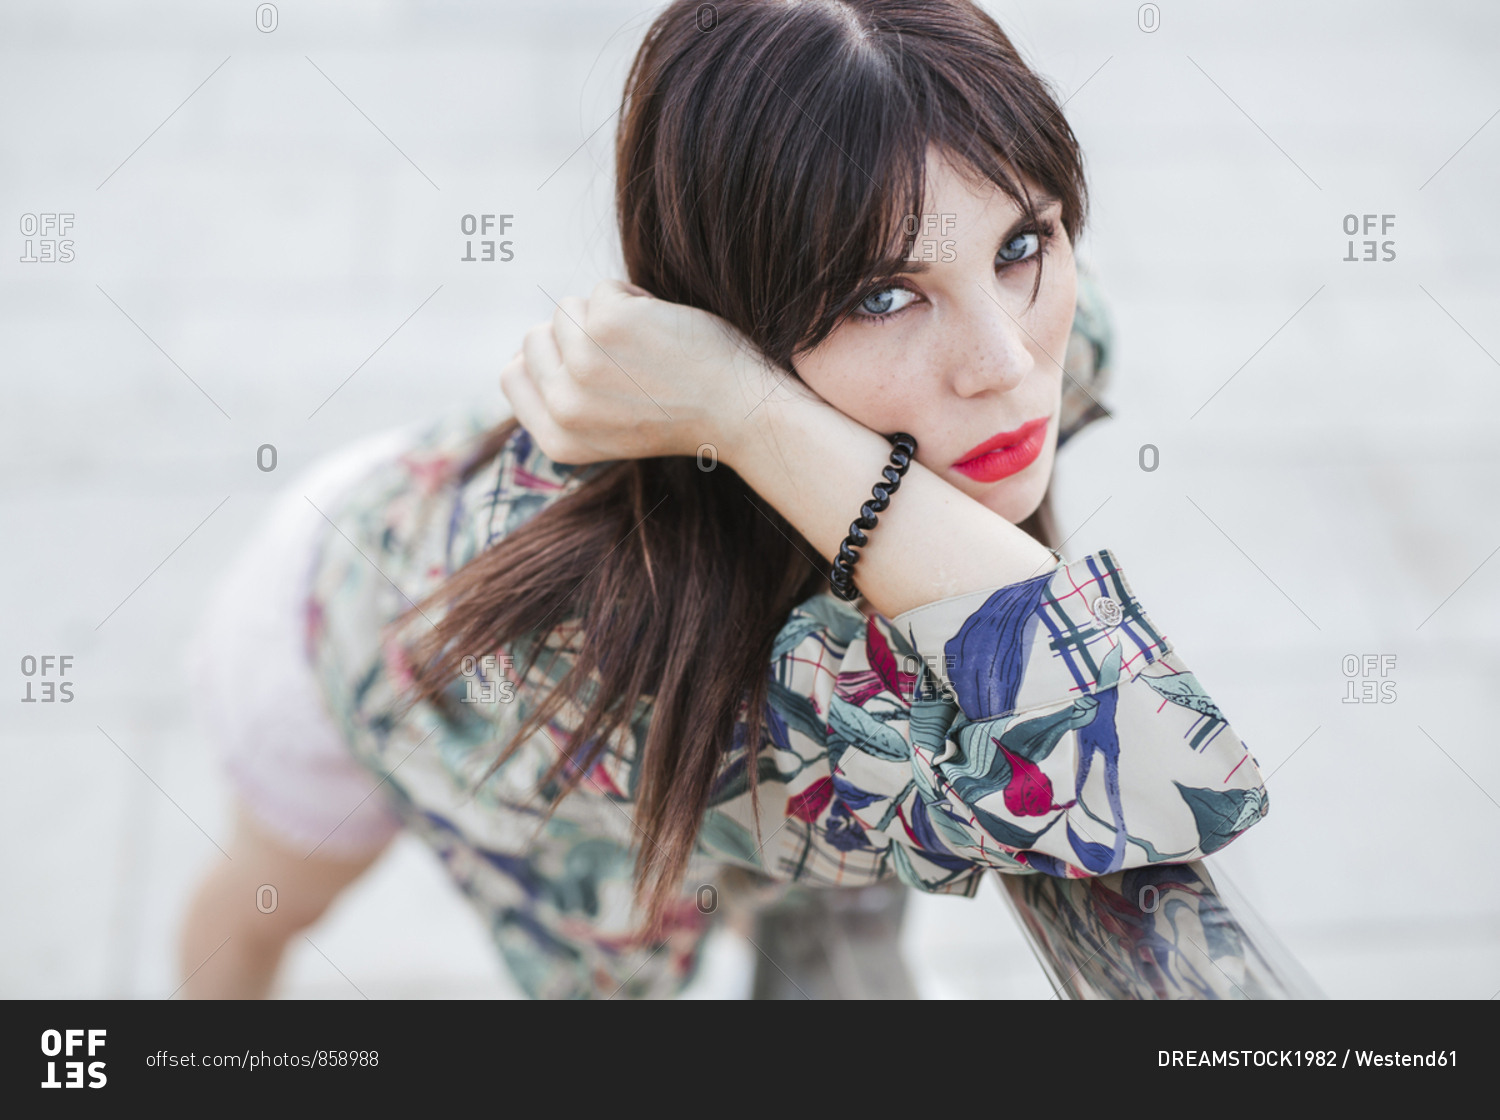 Portrait of young woman posing wearing patterned blouse